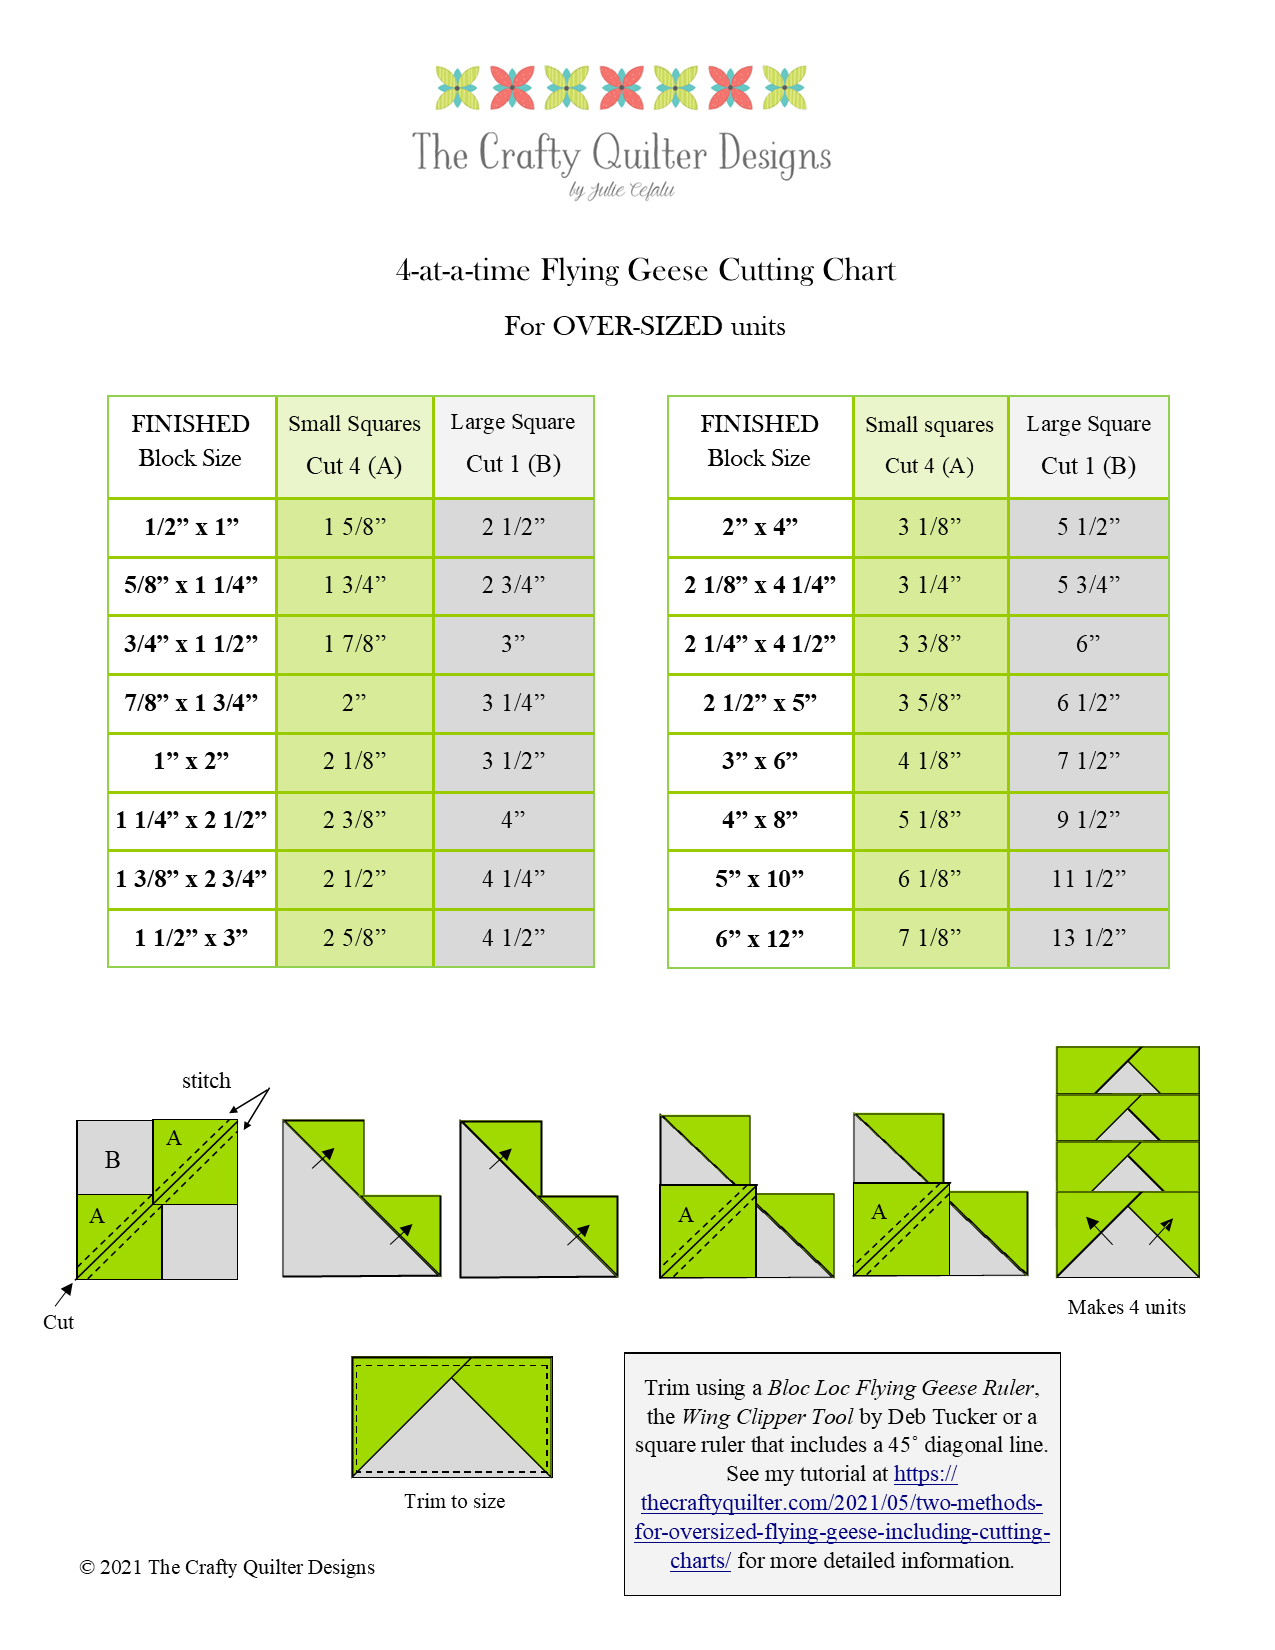 Two Methods For Oversized Flying Geese Including Cutting Charts The Crafty Quilter